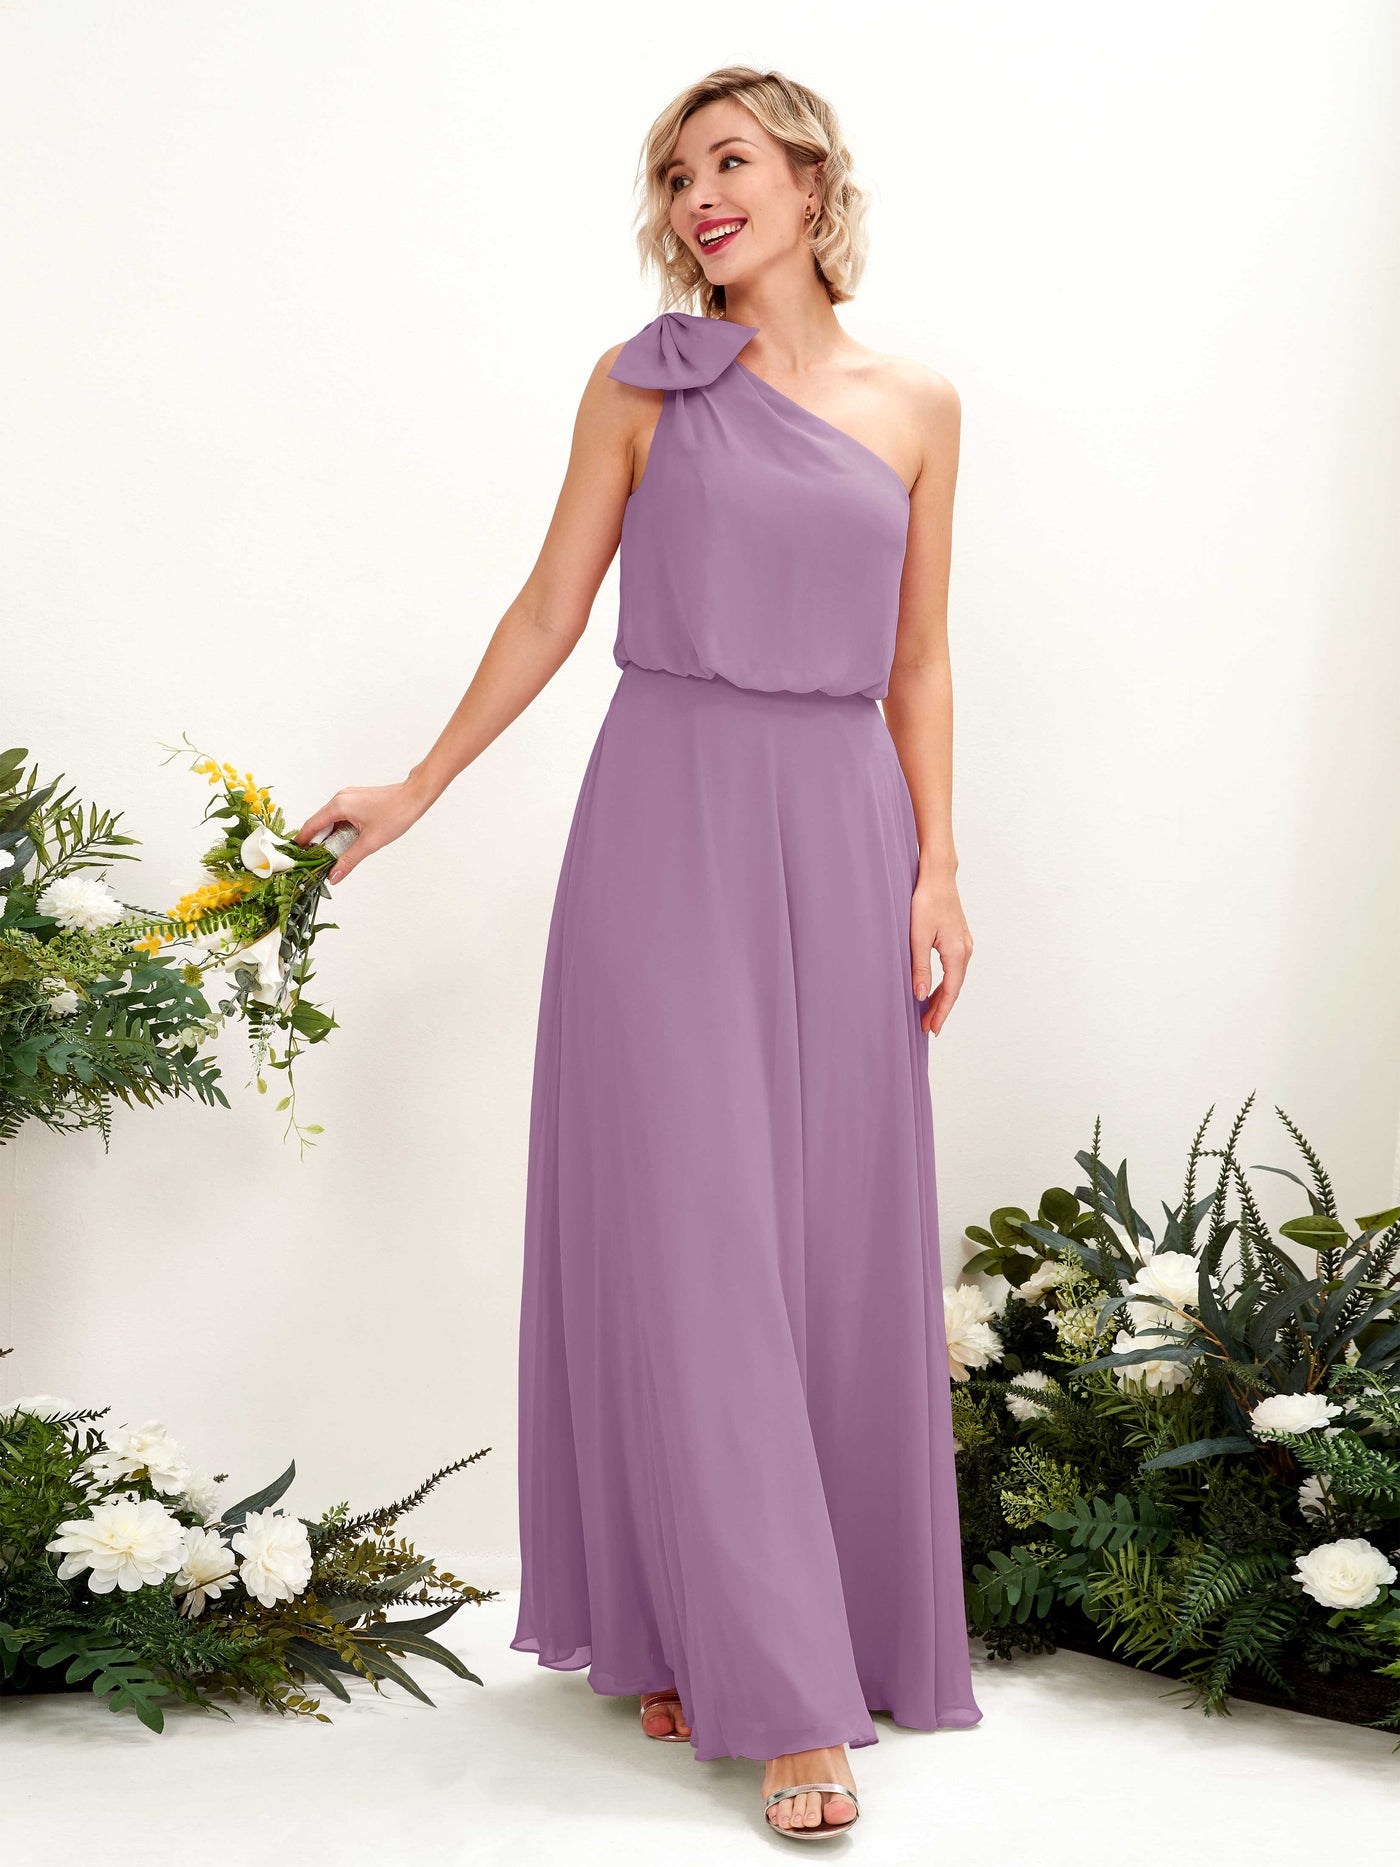 Orchid Mist Bridesmaid Dresses Bridesmaid Dress A-line Chiffon One Shoulder Full Length Sleeveless Wedding Party Dress (81225521)#color_orchid-mist